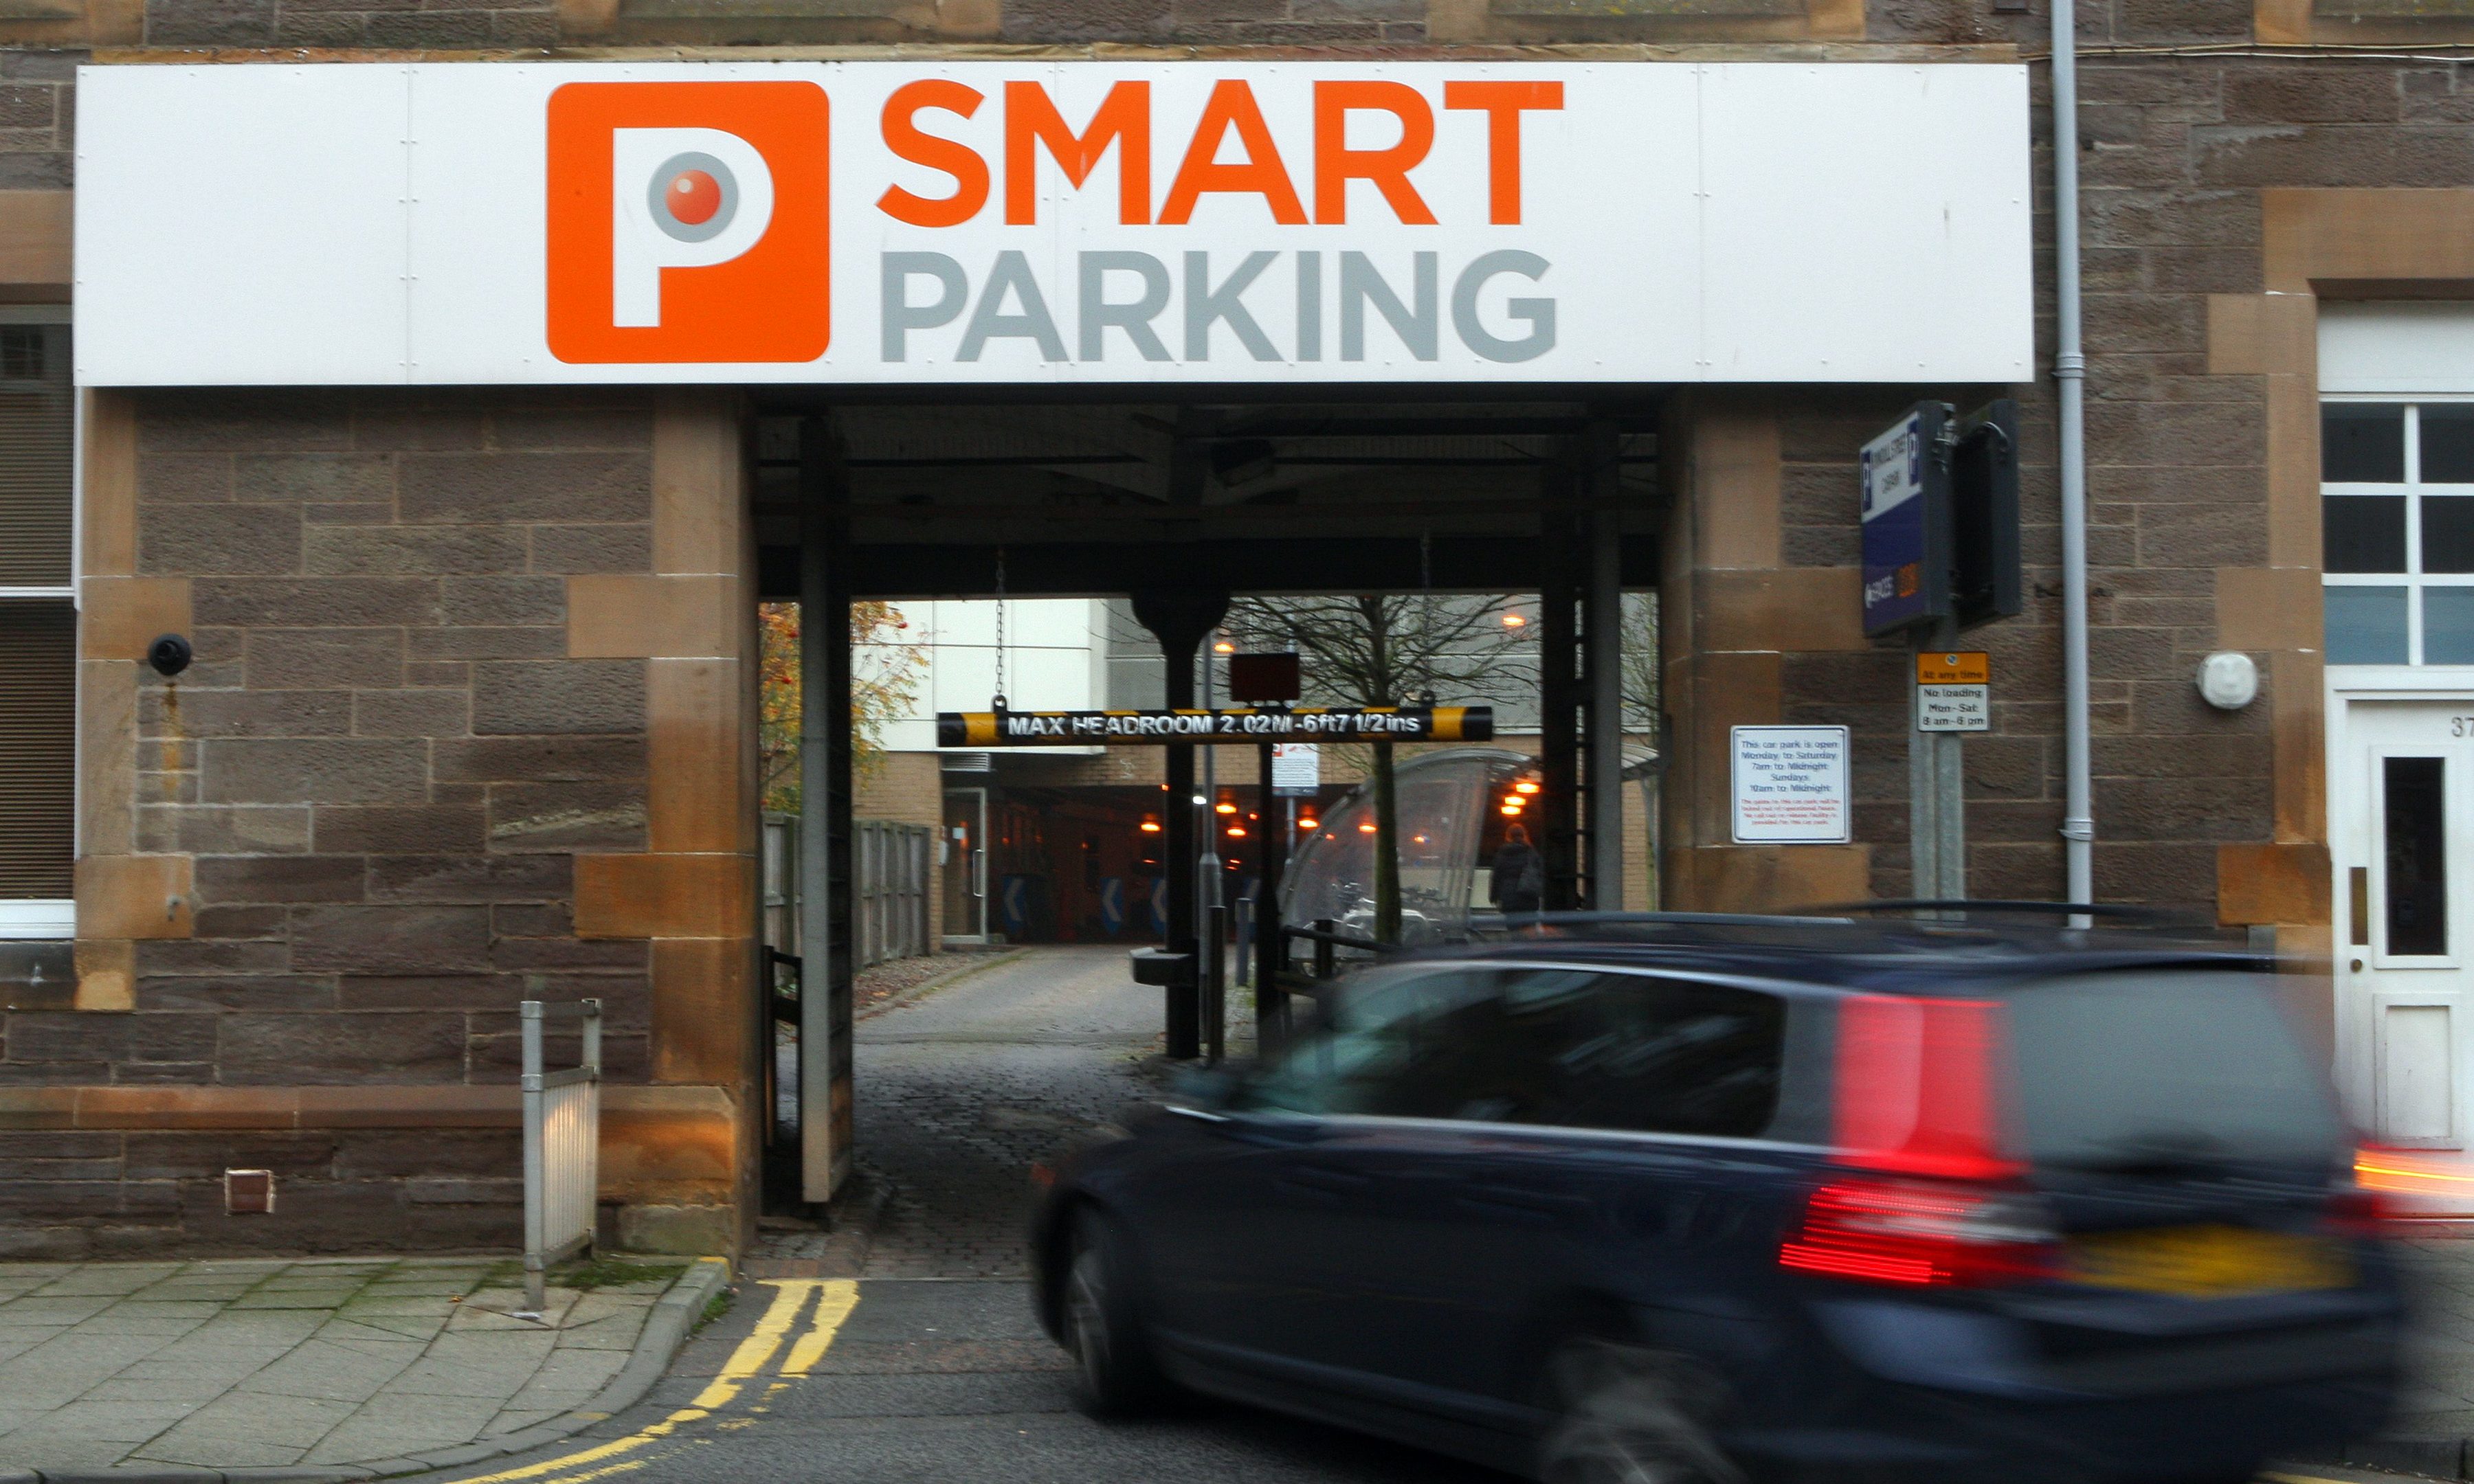 The controversial Smart Parking site in Kinnoull Street, Perth.